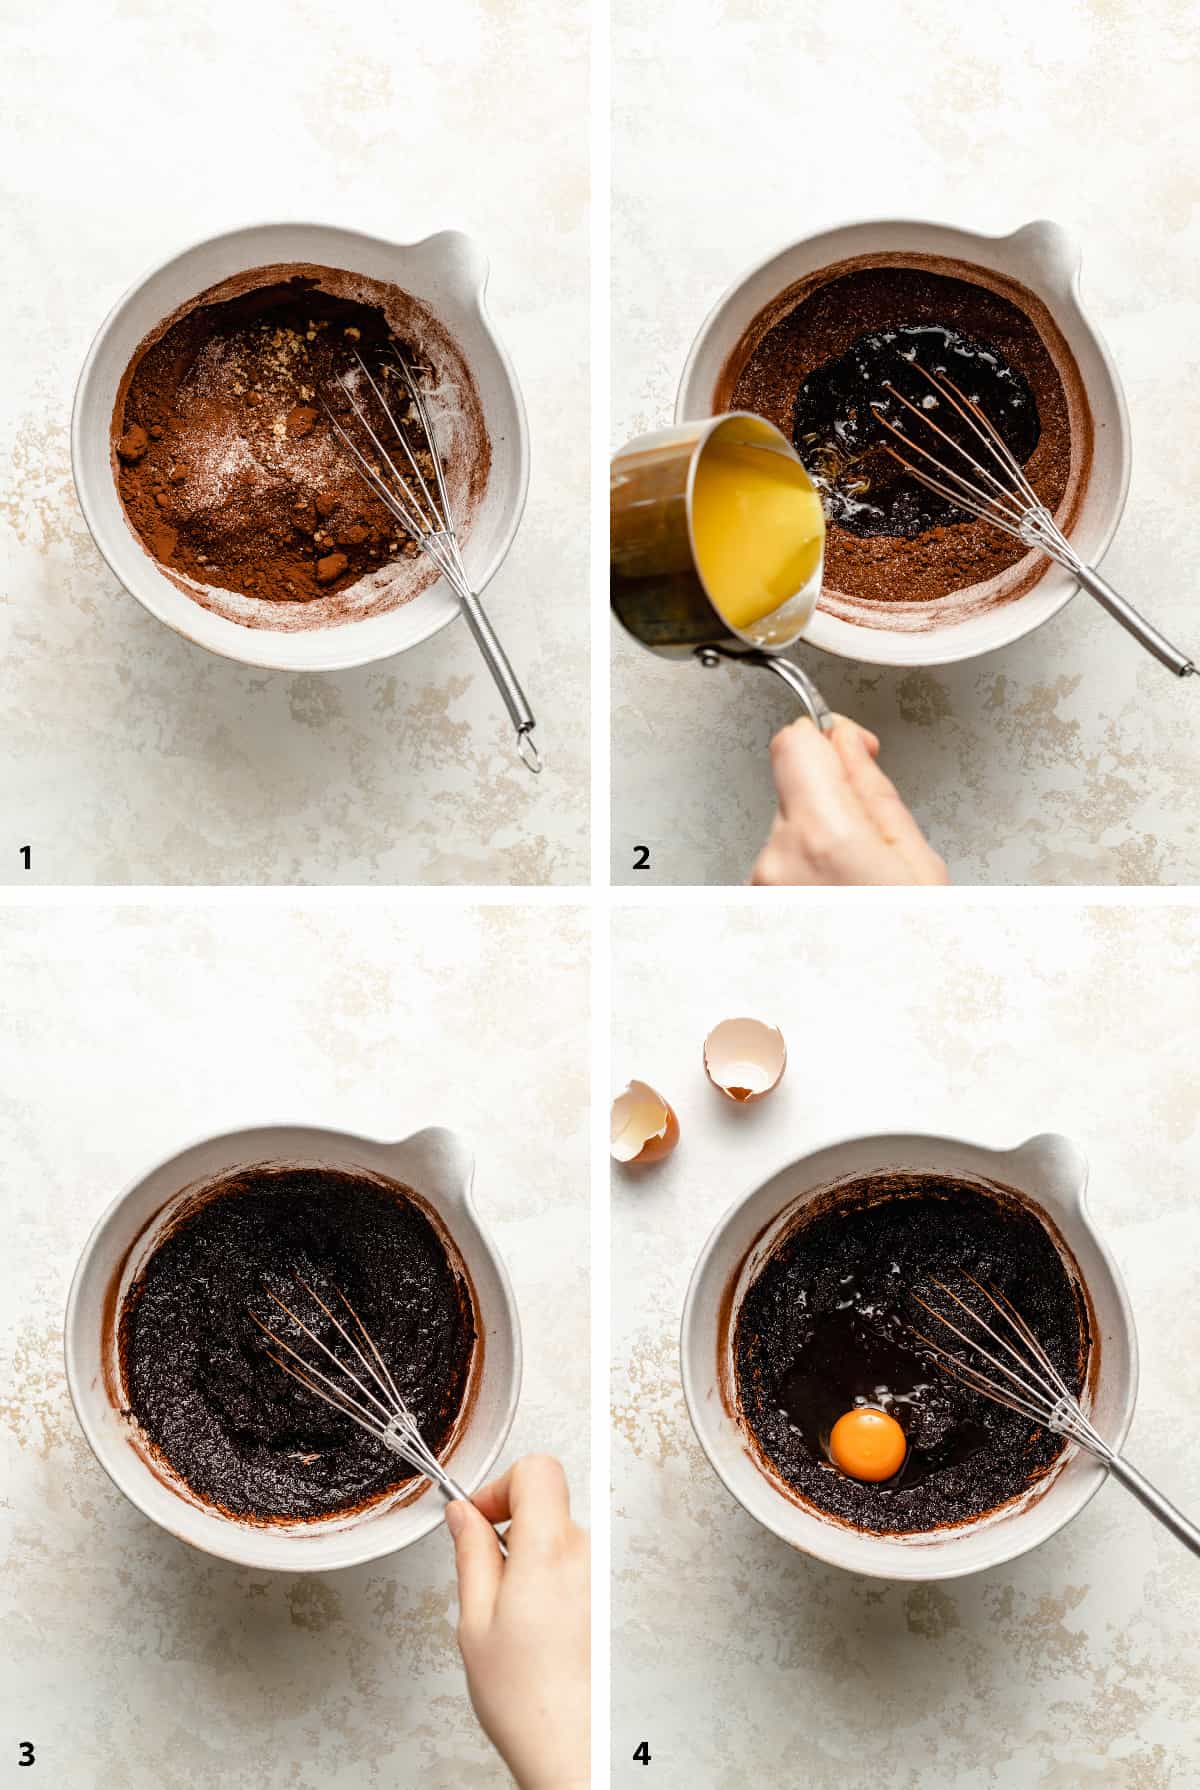 Process steps of mixing butter into the cocoa powder and sugar, then adding in eggs. 